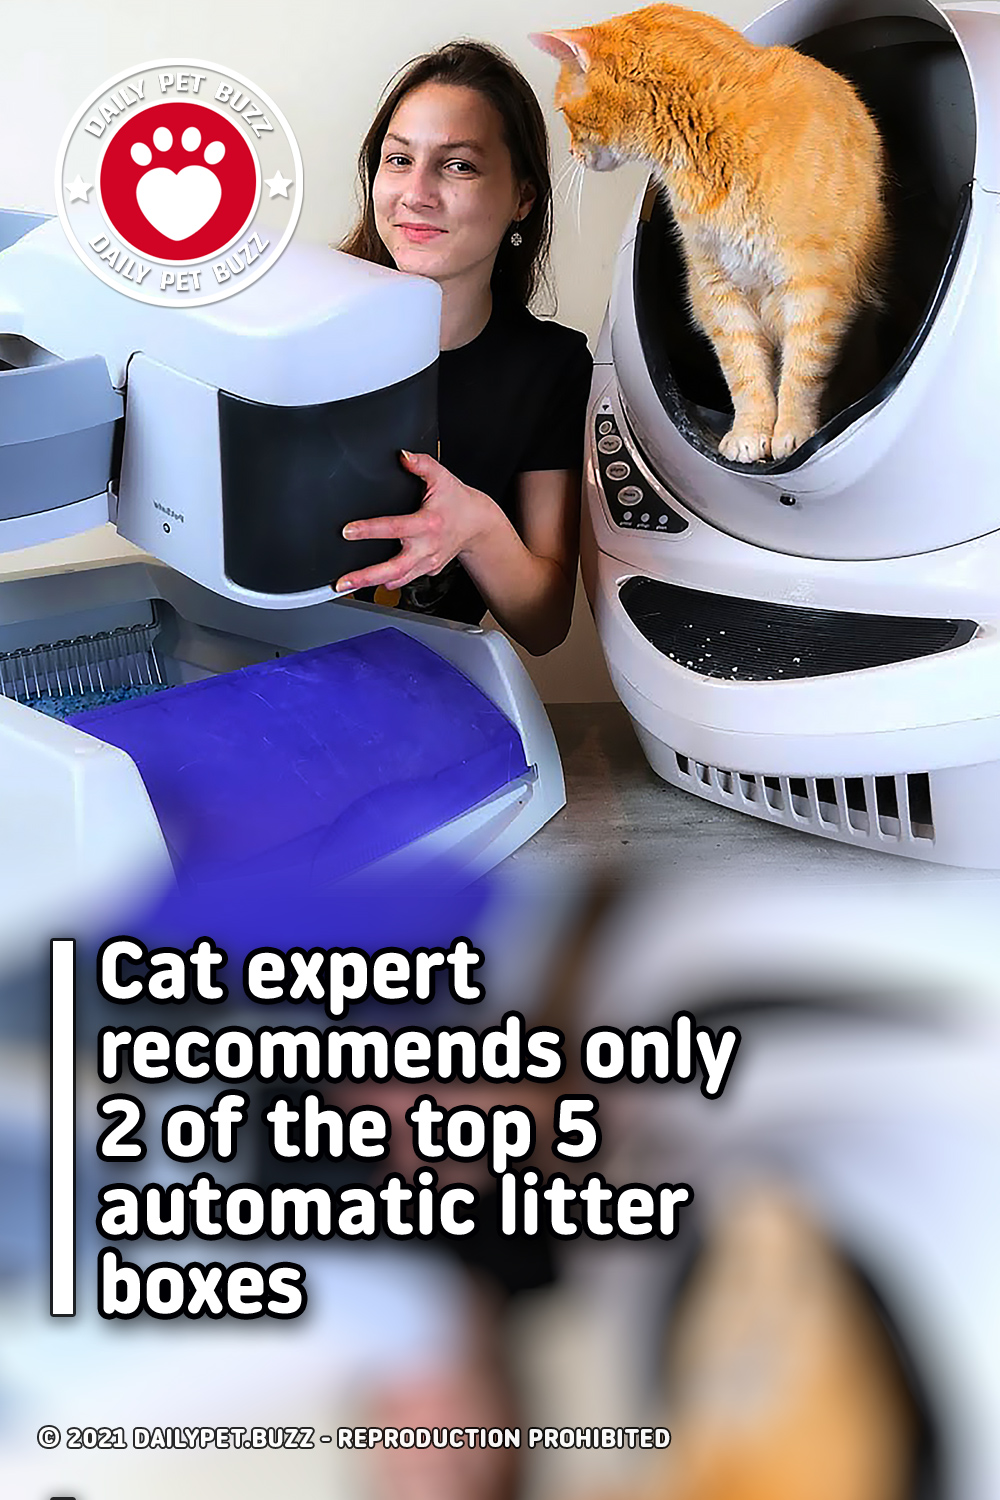 Cat expert recommends only 2 of the top 5 automatic litter boxes